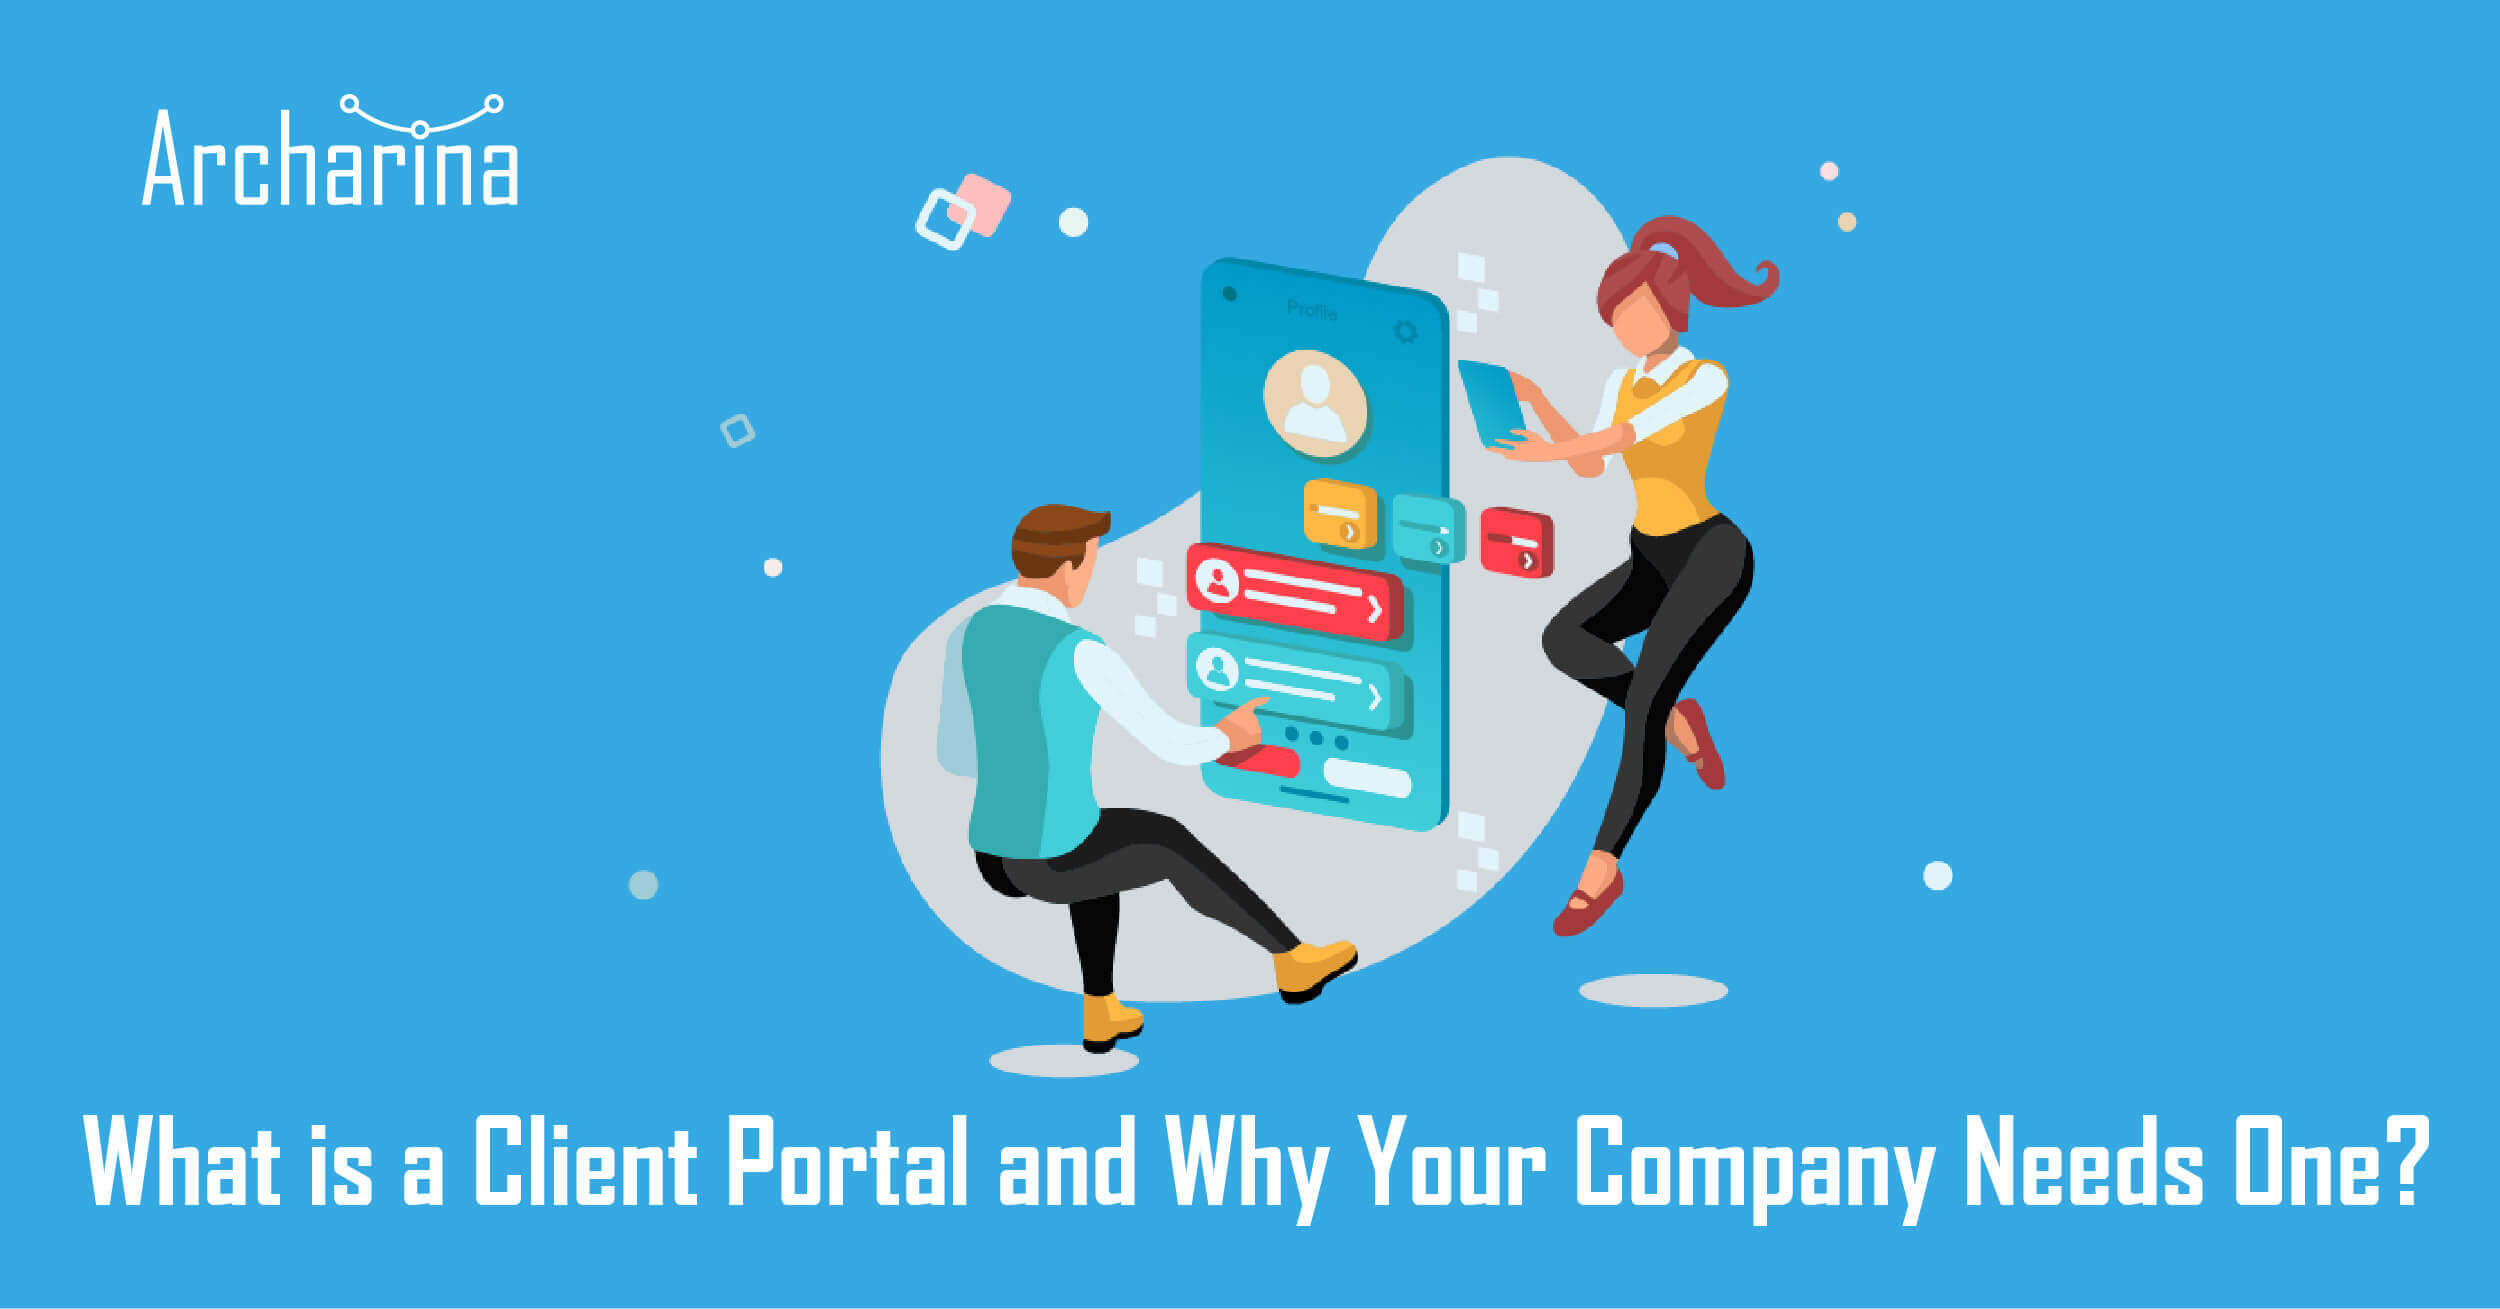 What-is-client-portal-and-why-your-company-needs-one.jpg